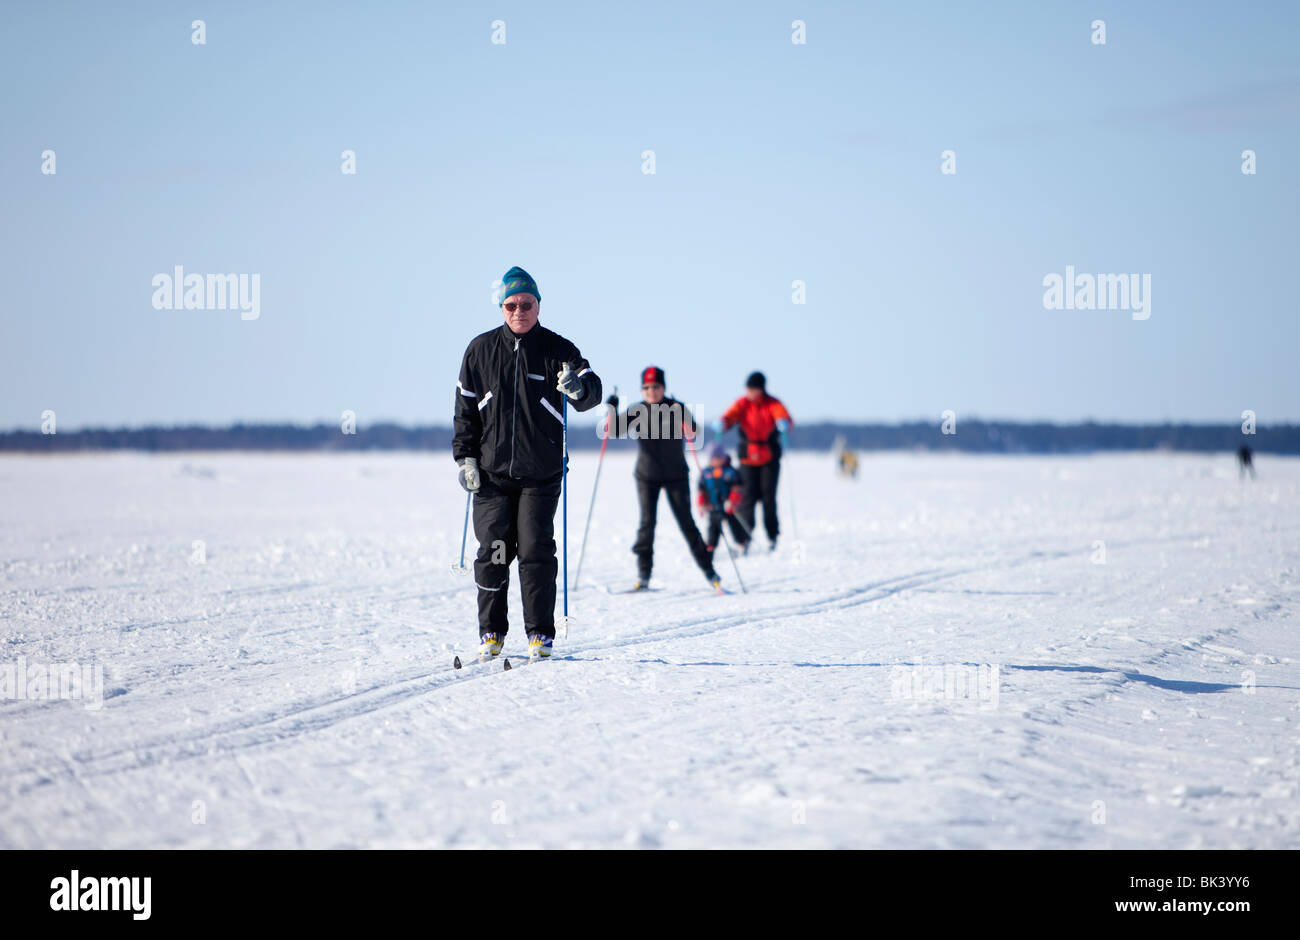 An elderly man skiing on a track made to sea ice , Finland Stock Photo